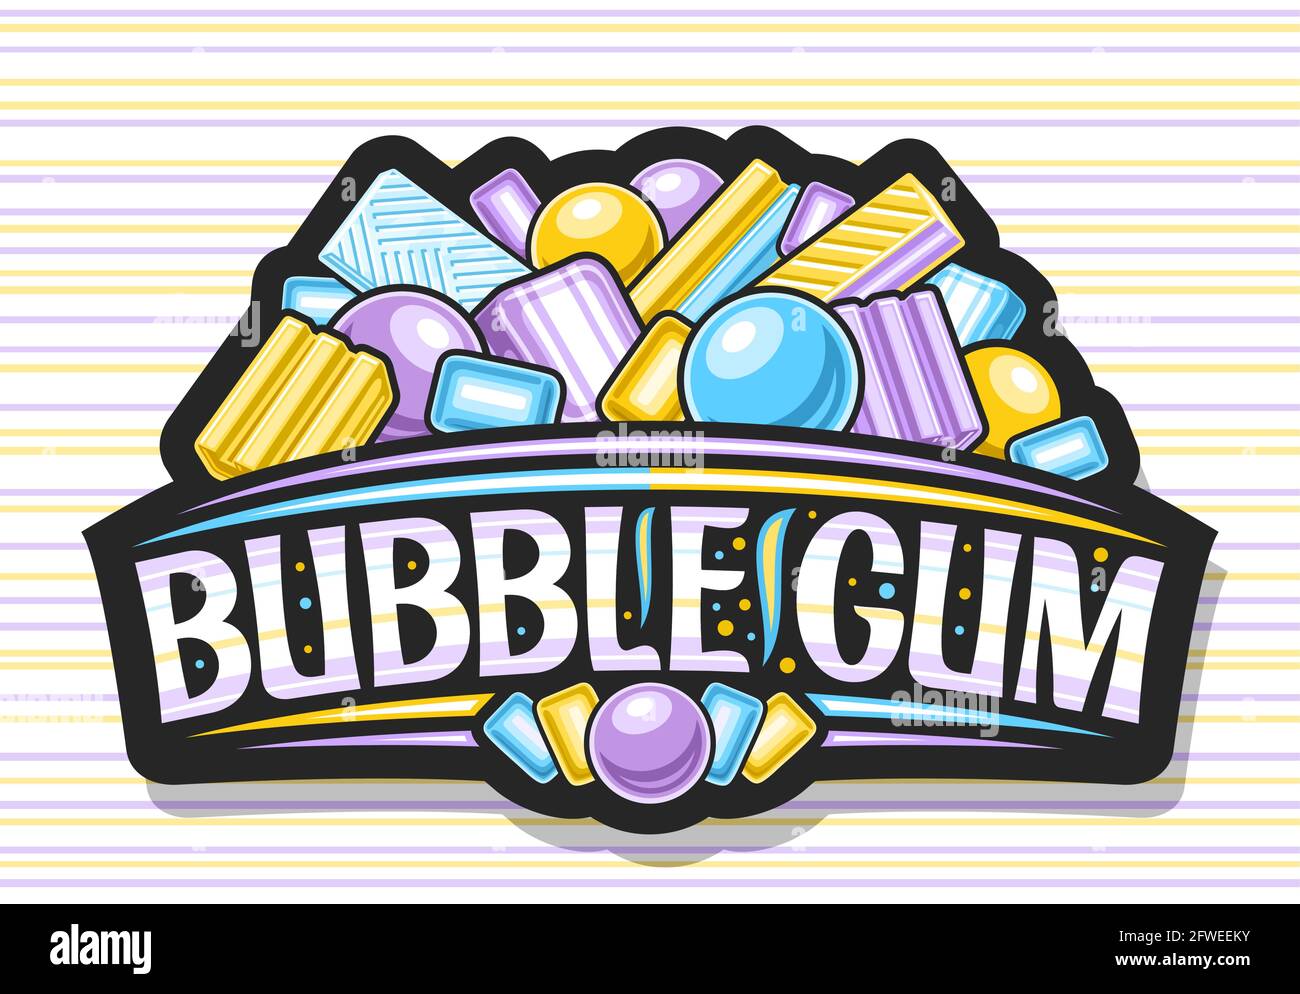 Vector logo for Bubble Gum, dark decorative signboard with illustration of variety colorful bubblegums and blue candies, badge with unique brush lette Stock Vector